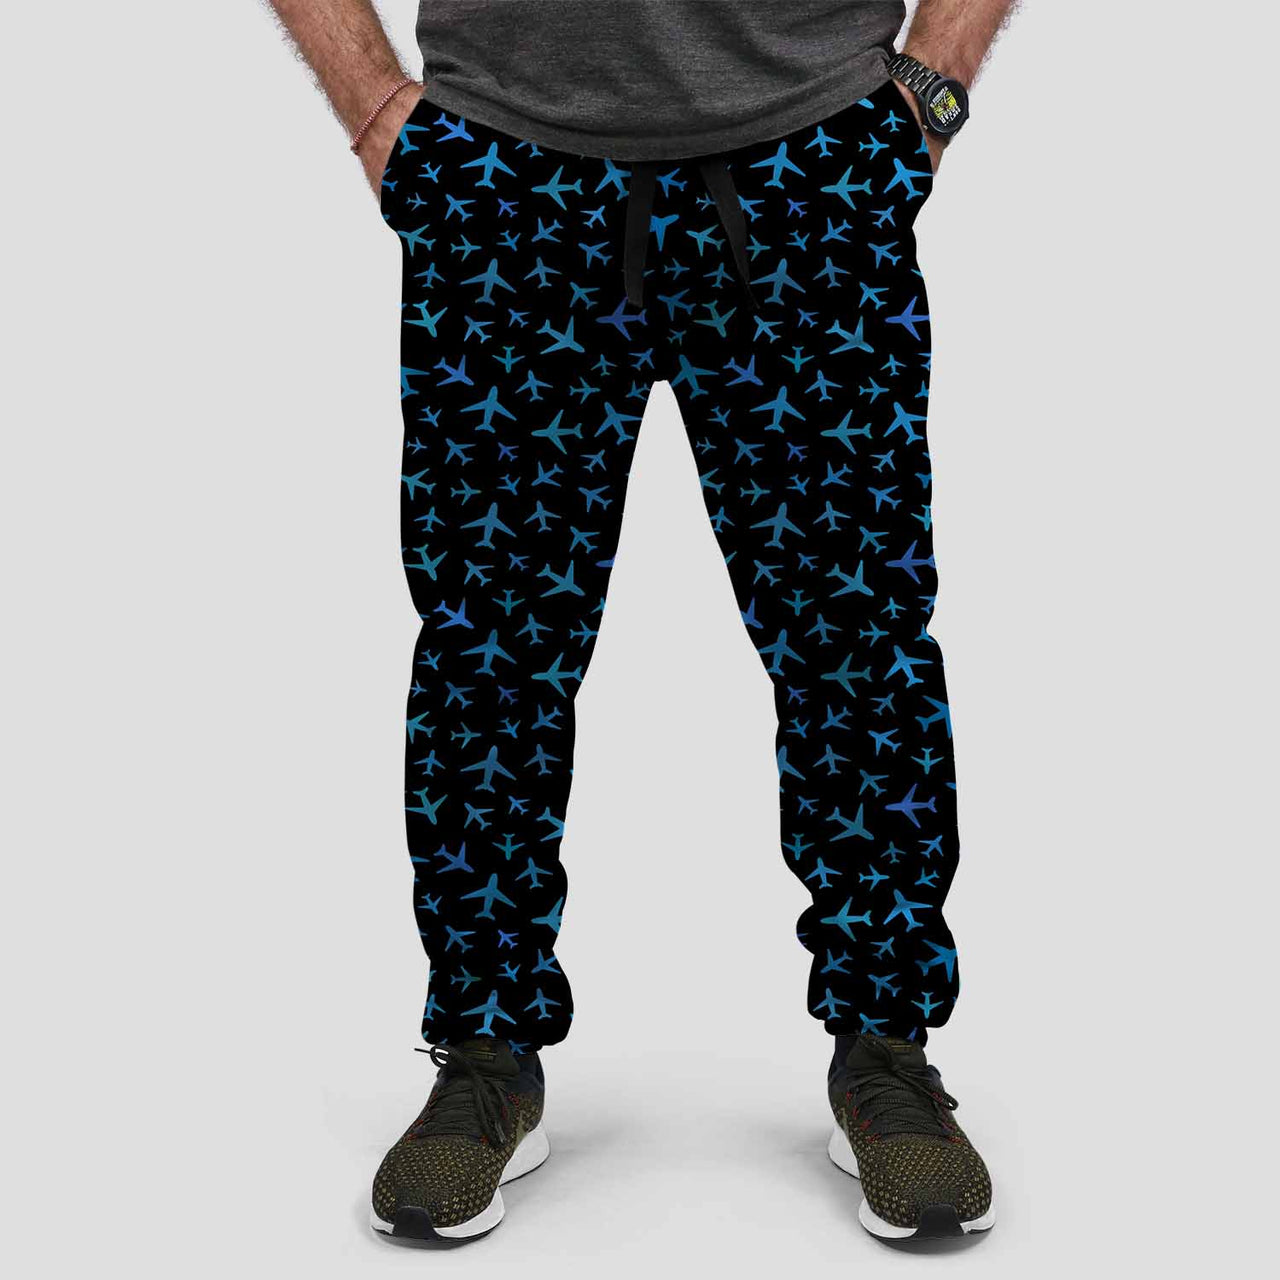 Many Airplanes Designed Sweat Pants & Trousers